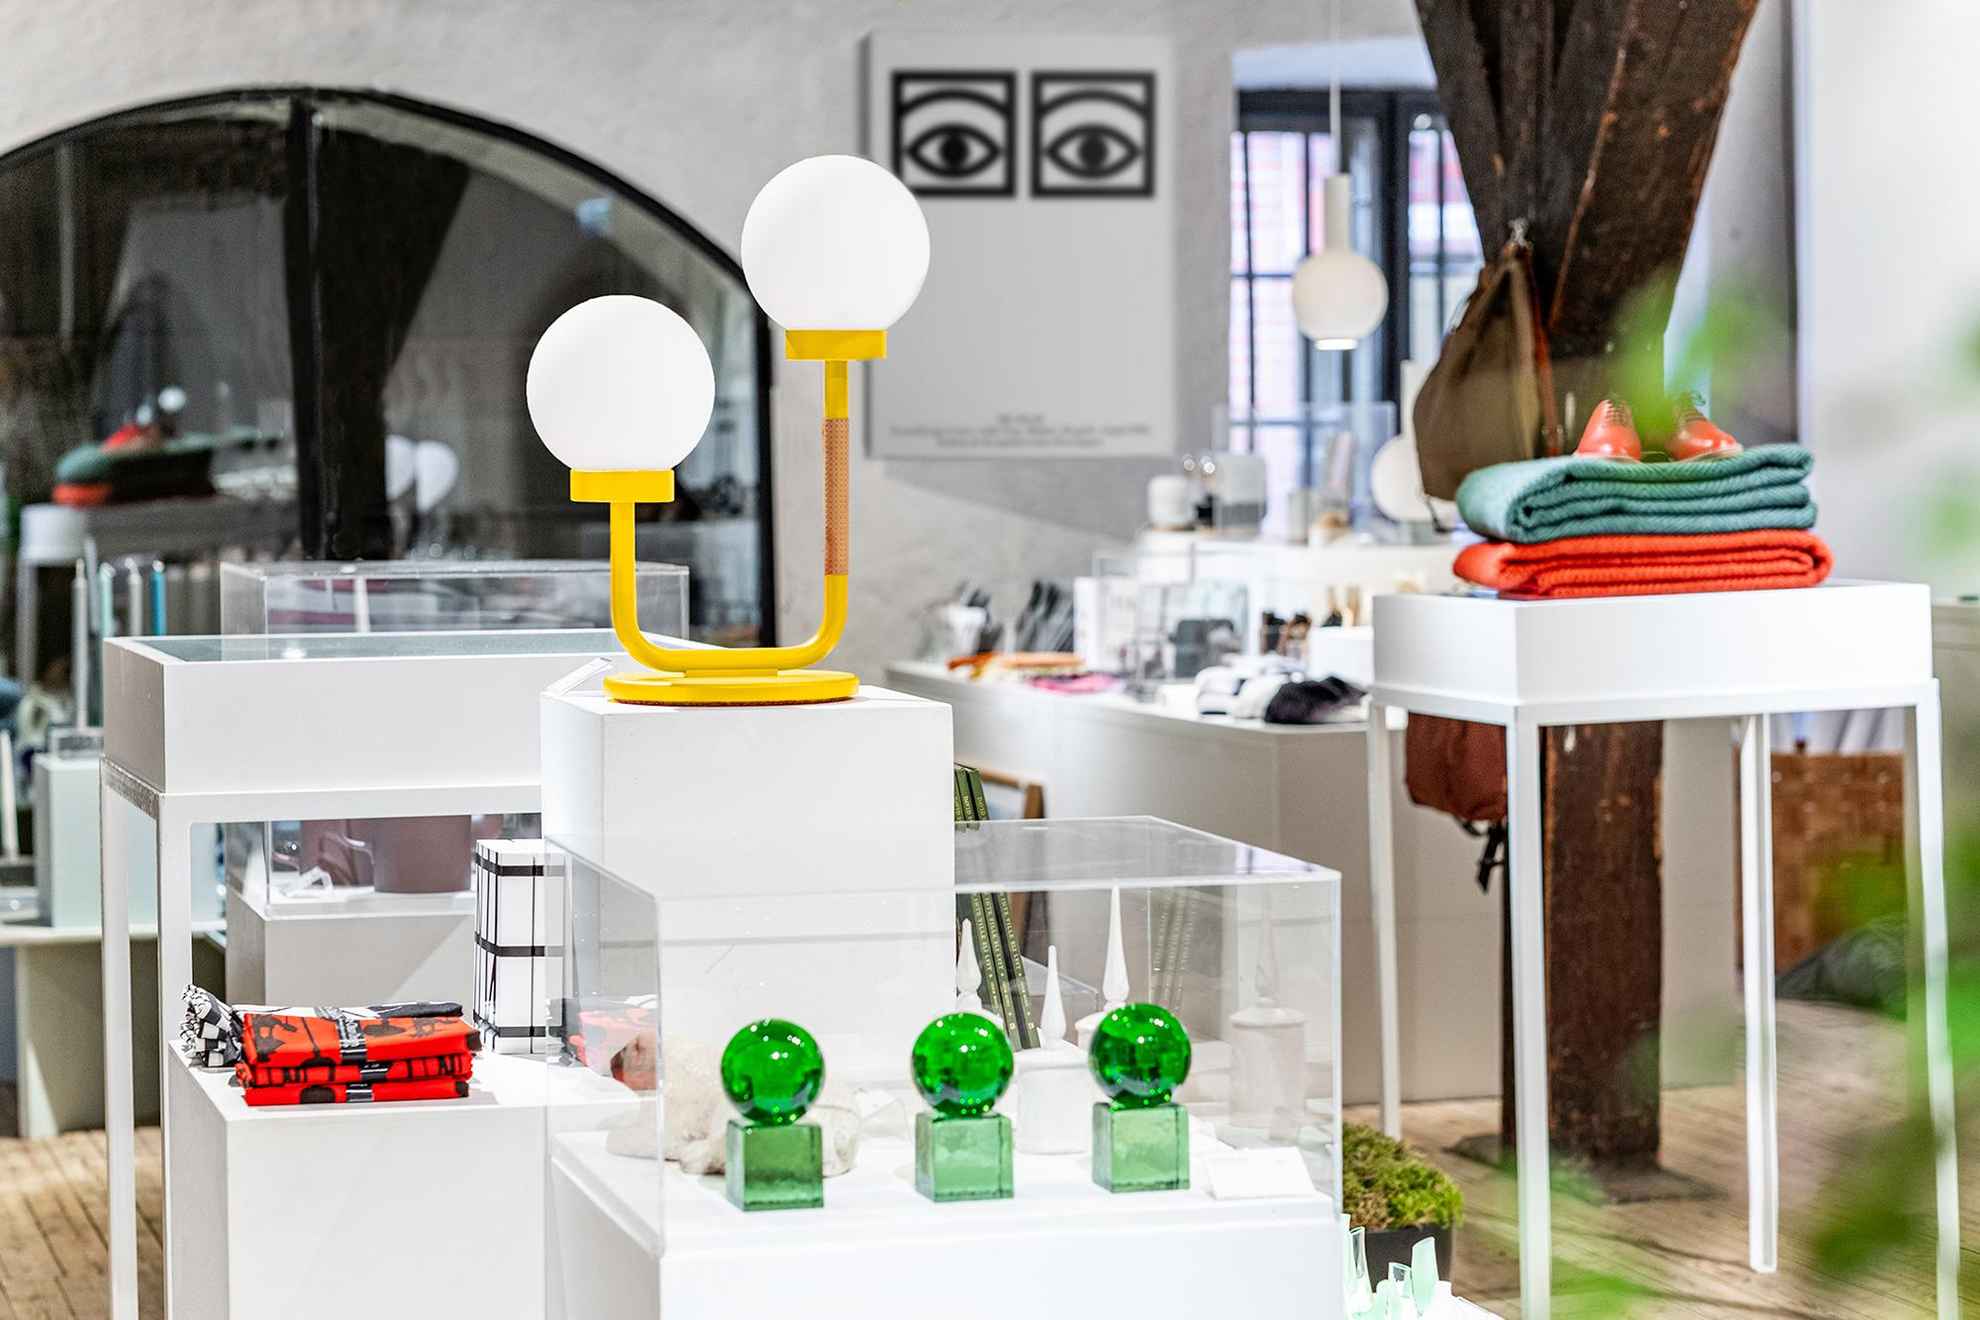 The shop of Form/Design center. Plenty of design objects on display, such as lamps, glass art and other items.